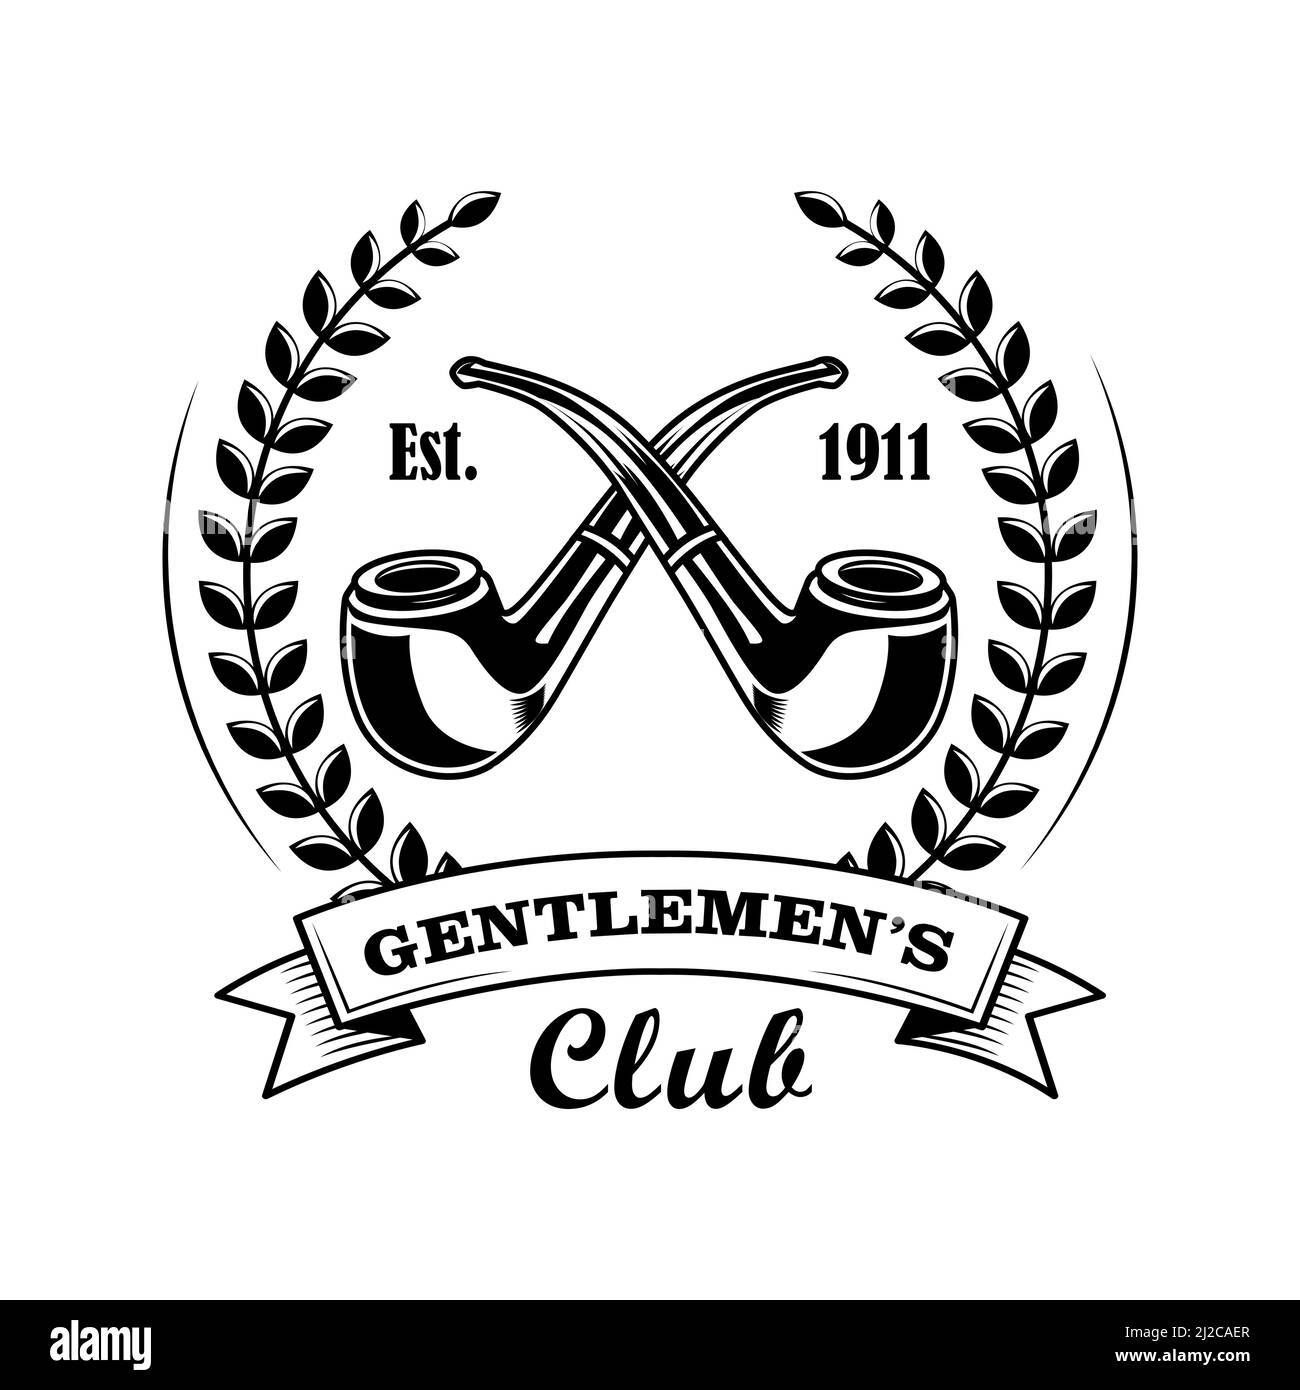 Gentleman club symbol vector illustration. Crossed pipes, laurel wreath, text. Tobacco shop concept for labels or badges templates Stock Vector